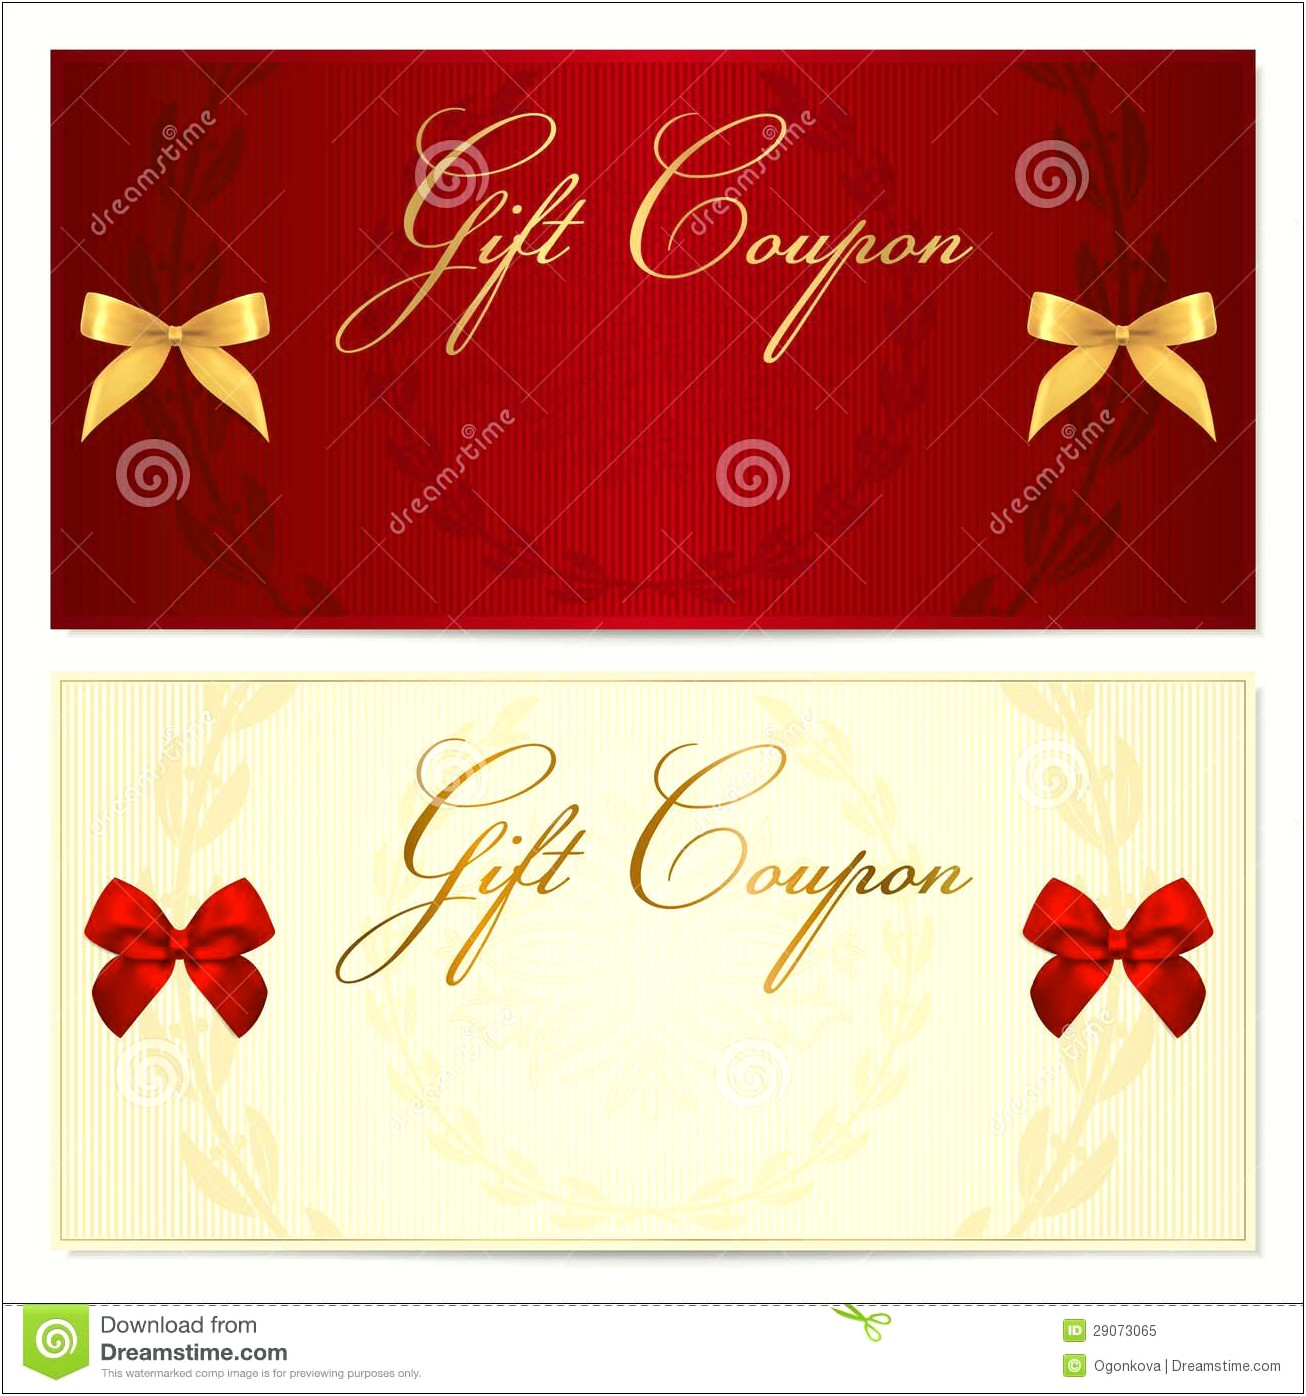 Free Christmas Gift Certificate Template Download